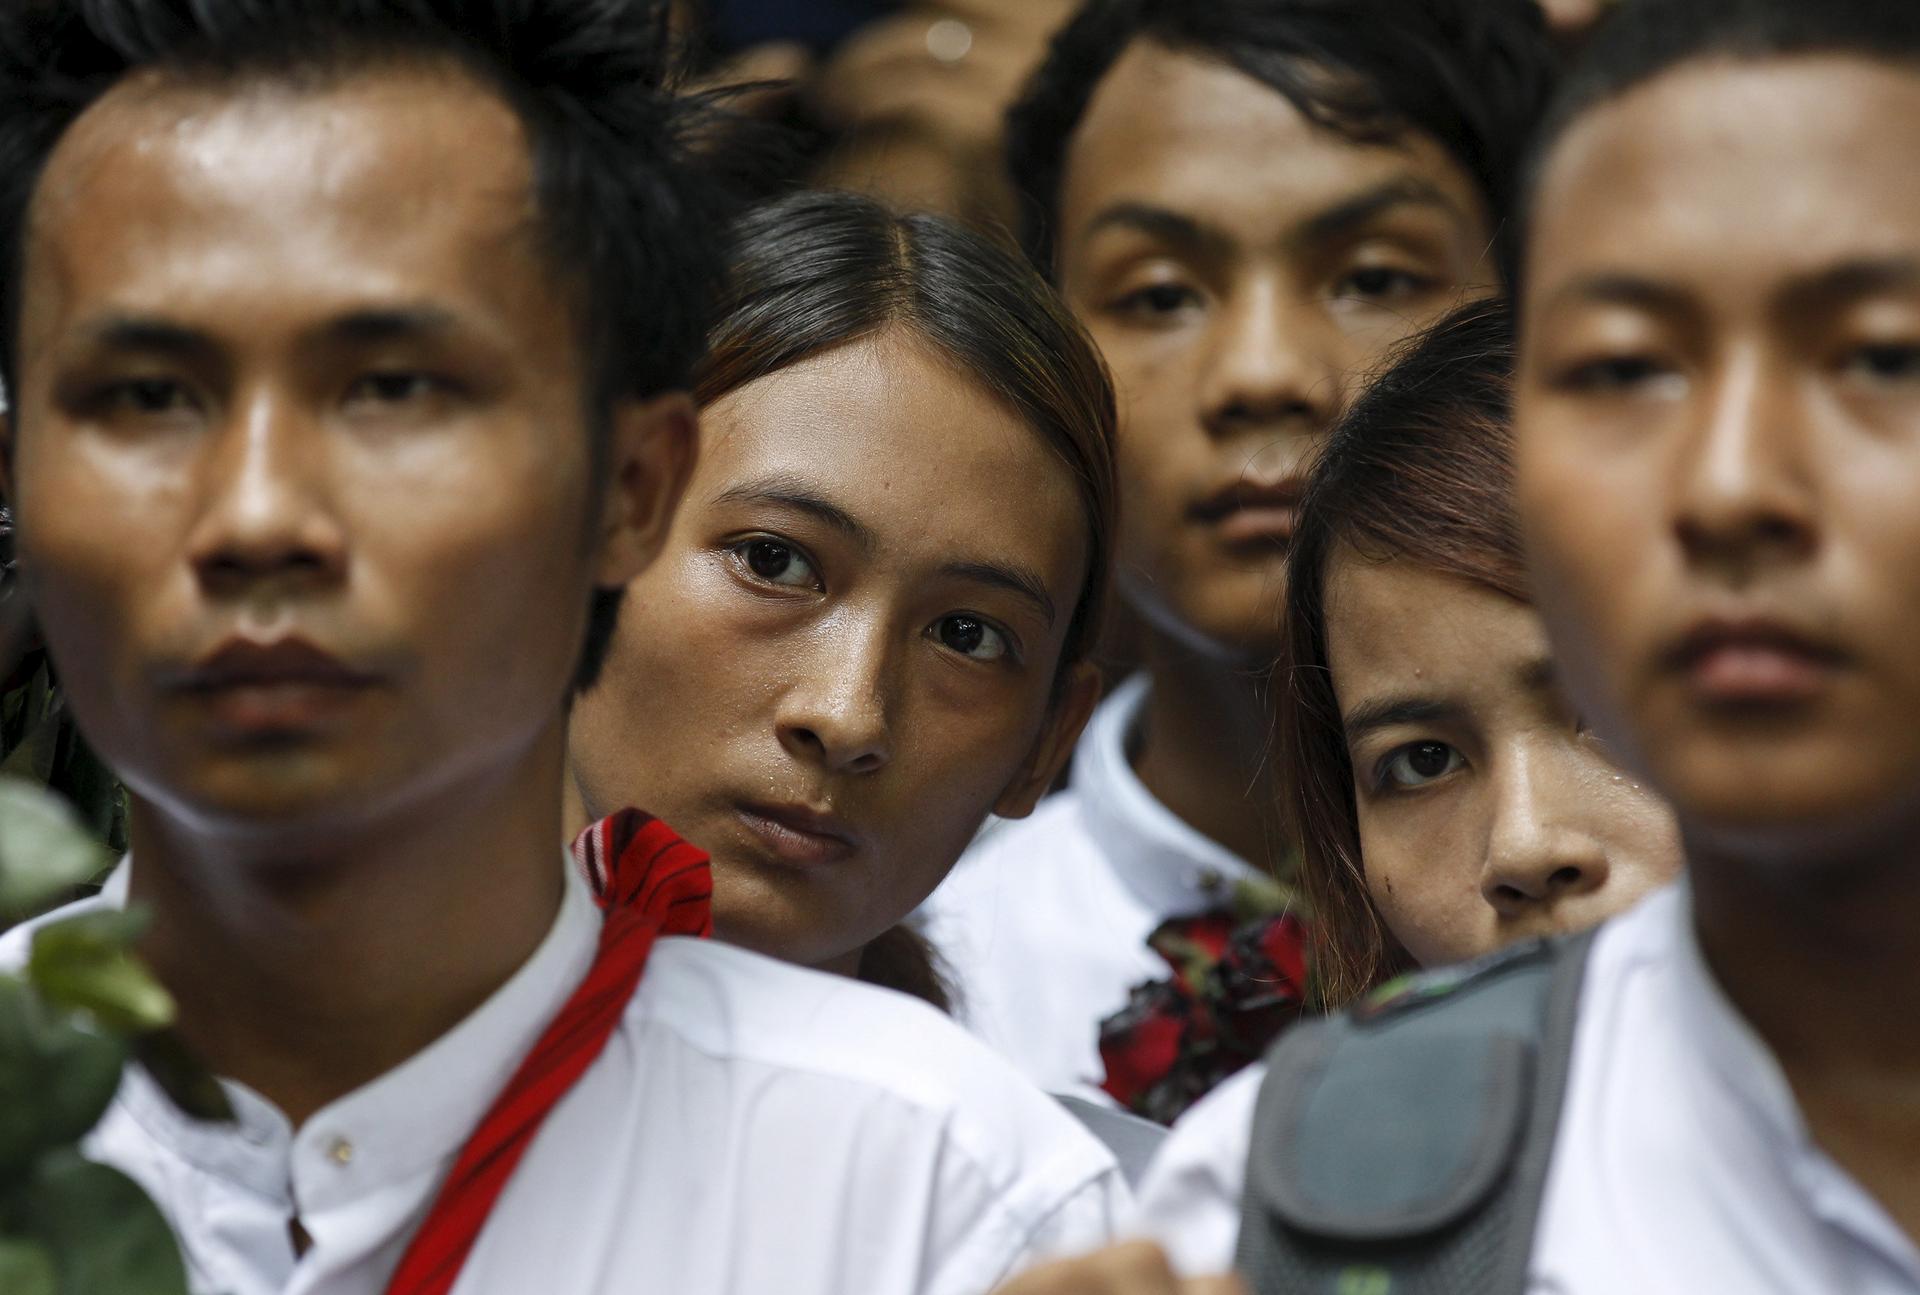 Demonstrators listen as a student leader gives a speech during a protest led by students at Yangon University in Myanmar July 7, 2015